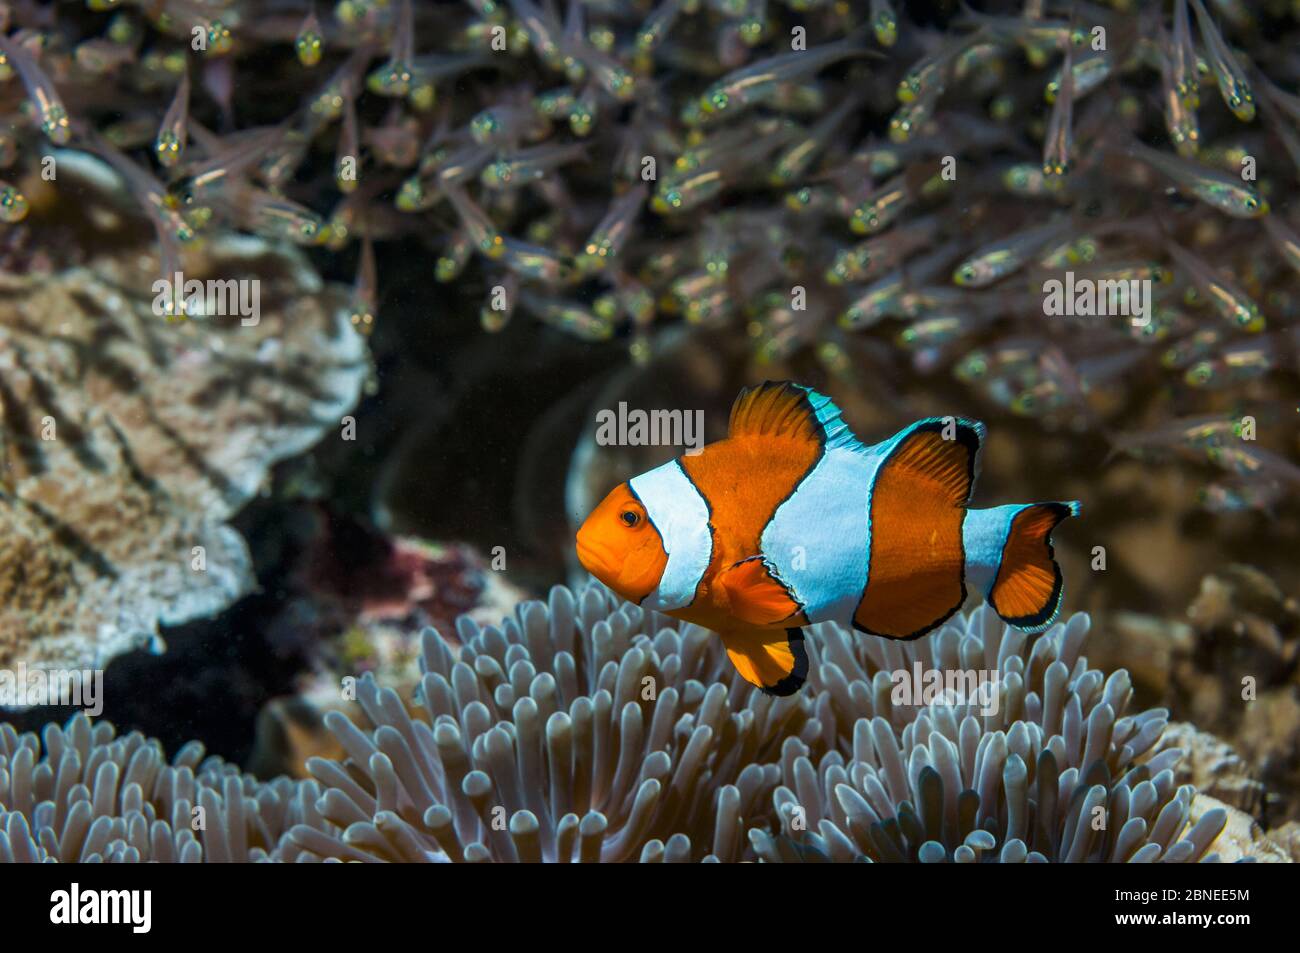 False clown anemonefish or Ocellaris anemonefish (Amphiprion ocellarus) with Pygmy sweepers in background. Mabul, Malaysia. Stock Photo